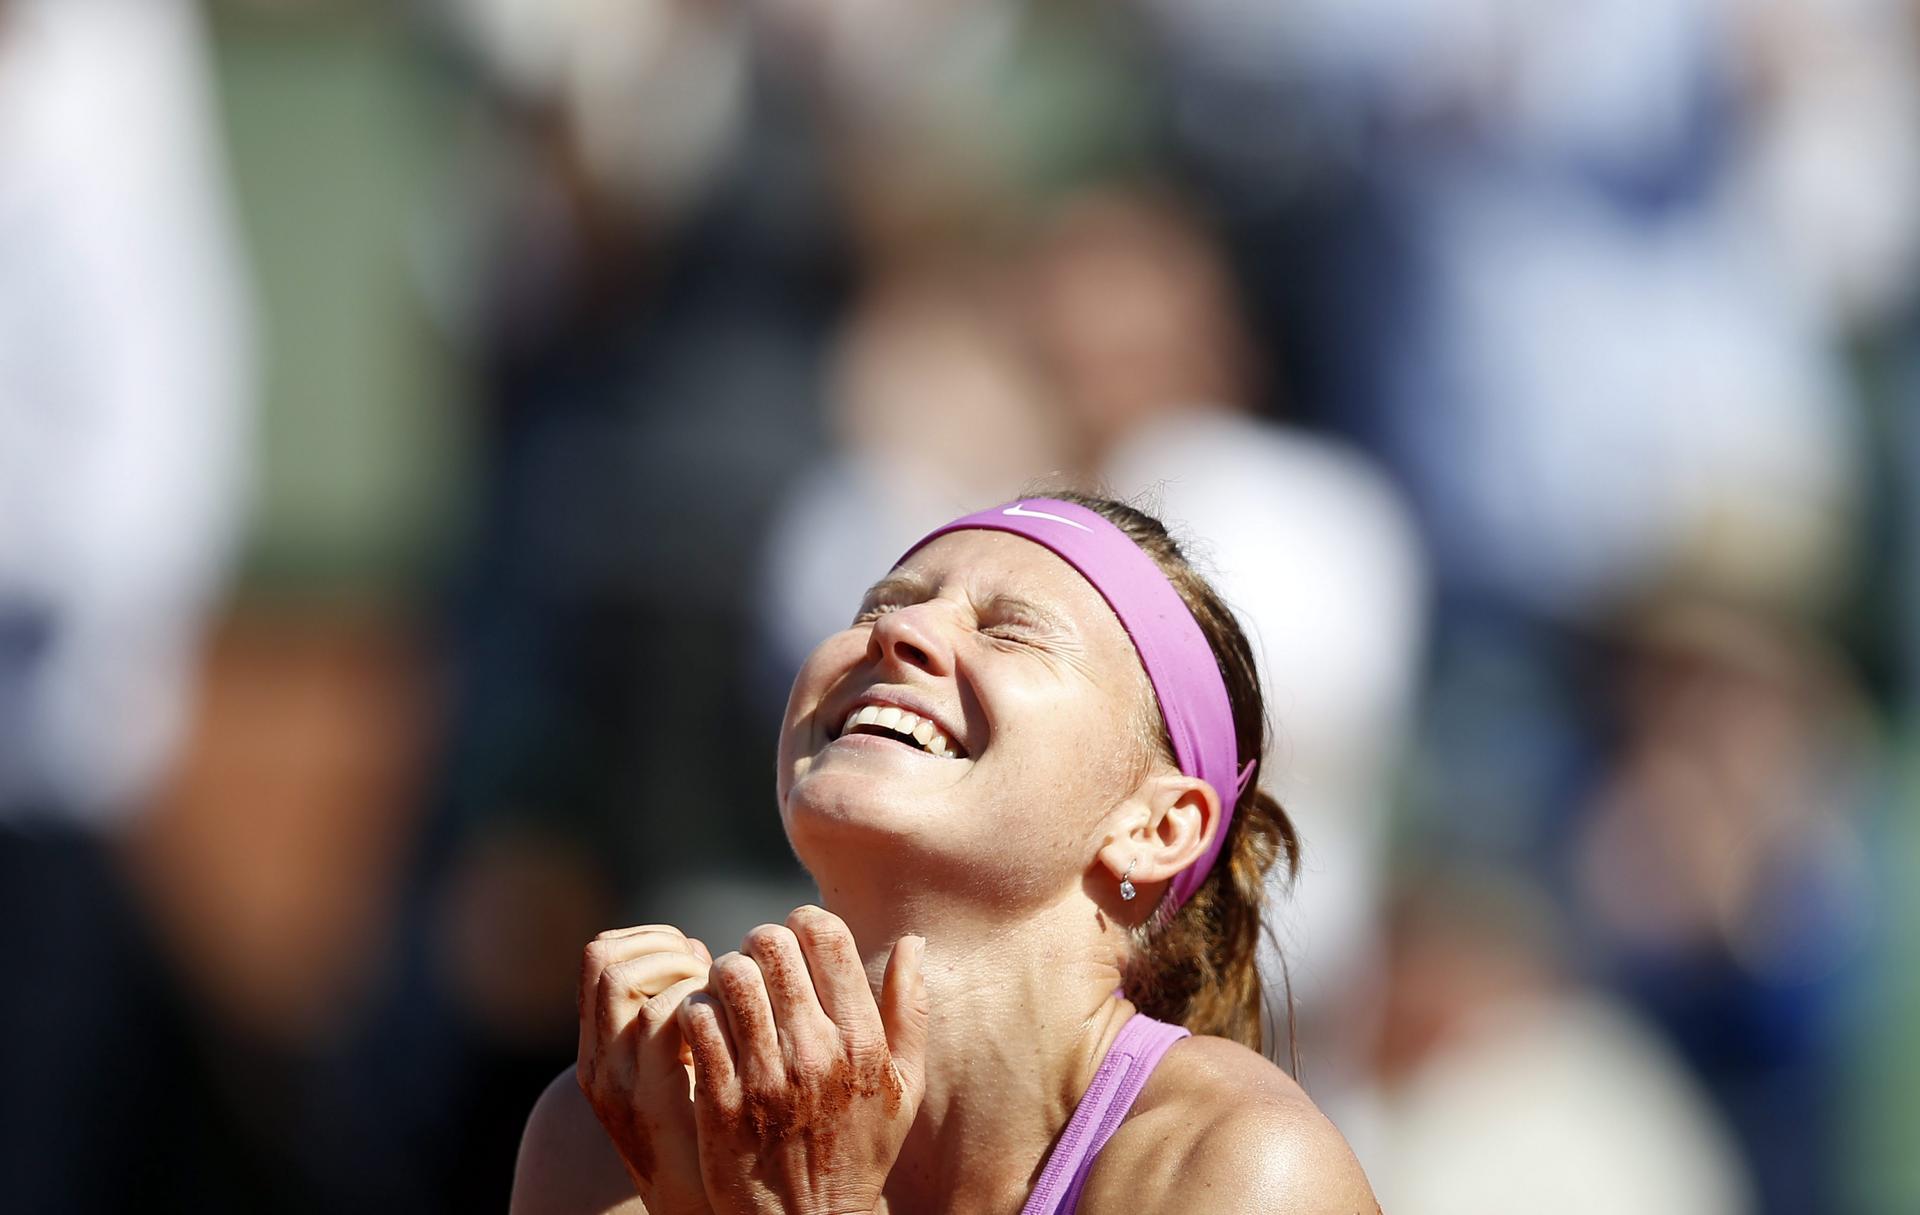 A jubilant Lucie Safarova reacts after winning her semi-final against Ana Ivanovic of Serbia 7-6, 7-5. Photos: EPA